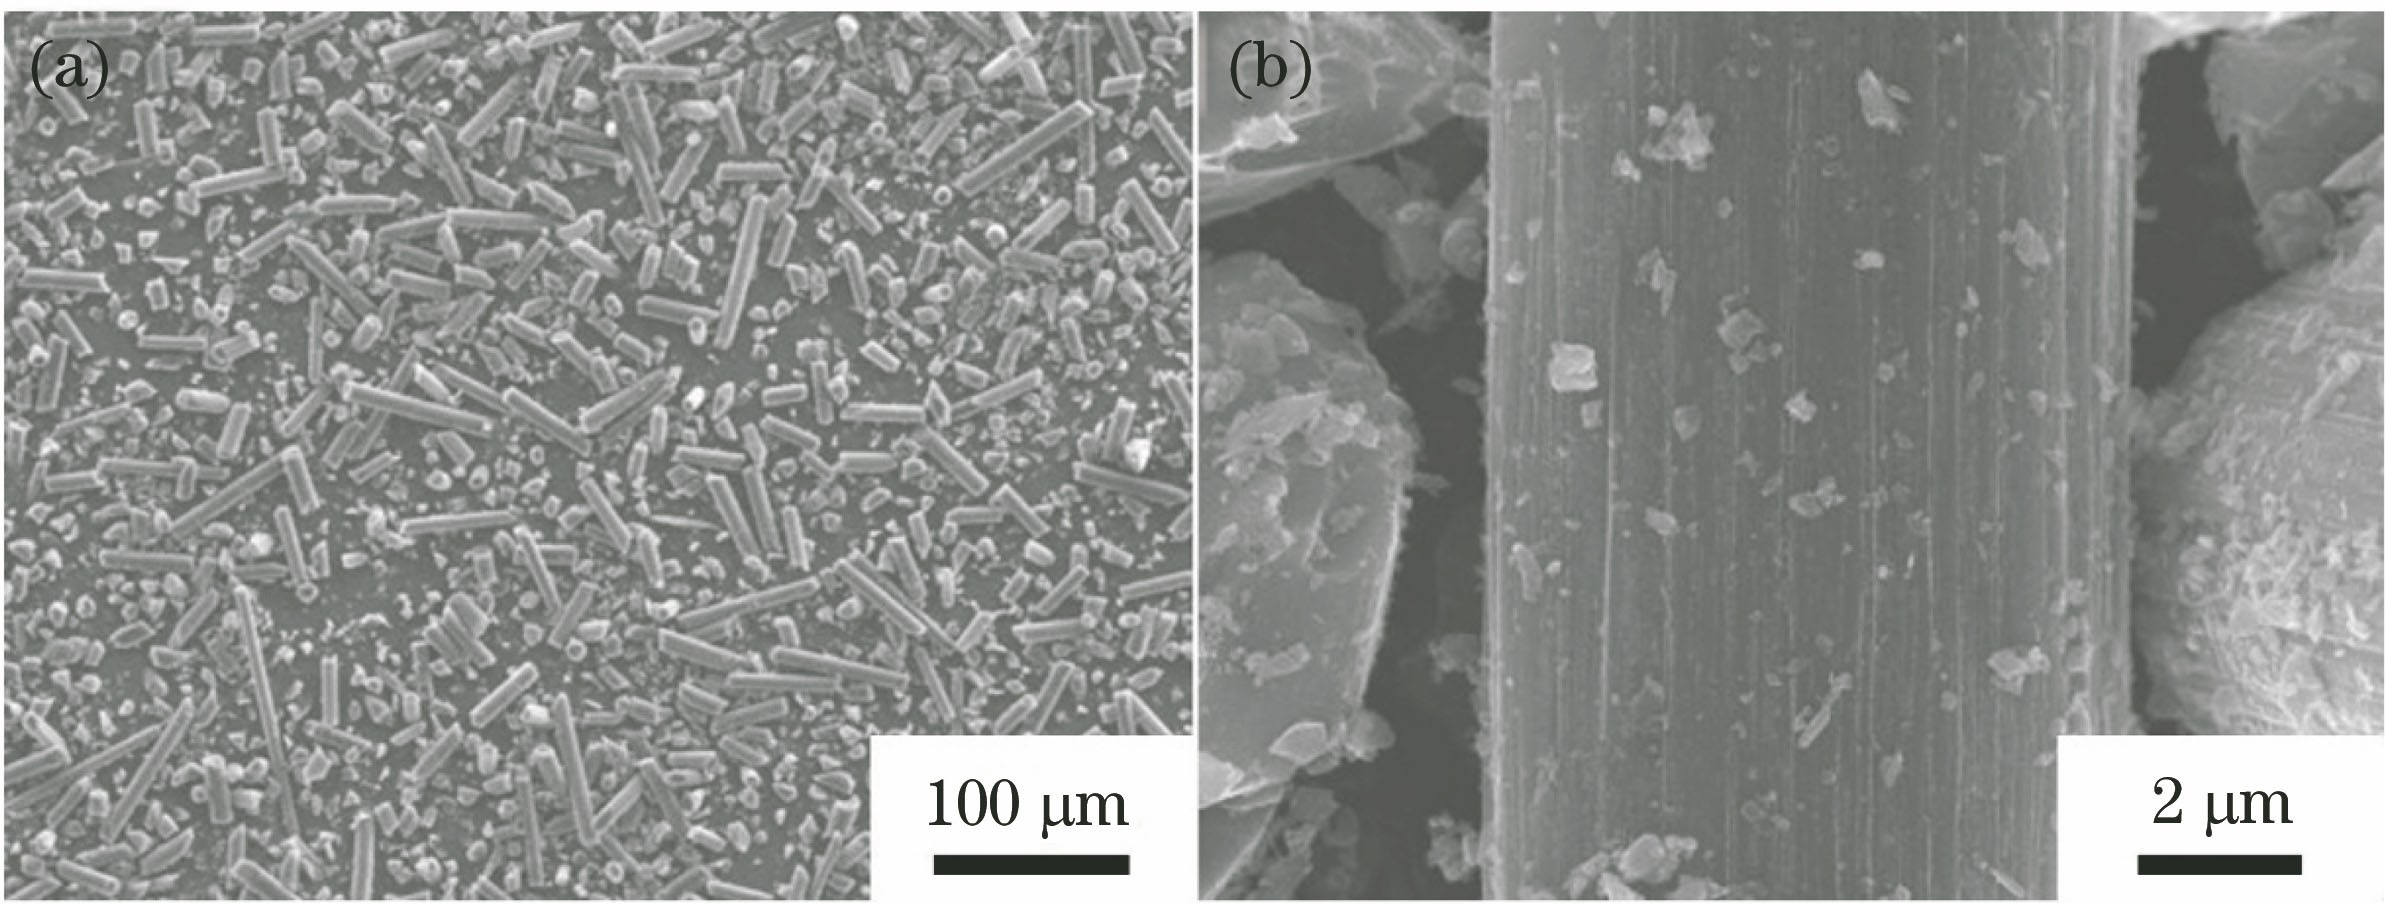 Surface micro-morphology of carbon fiber. (a) Magnification by 140; (b) magnification by 5000